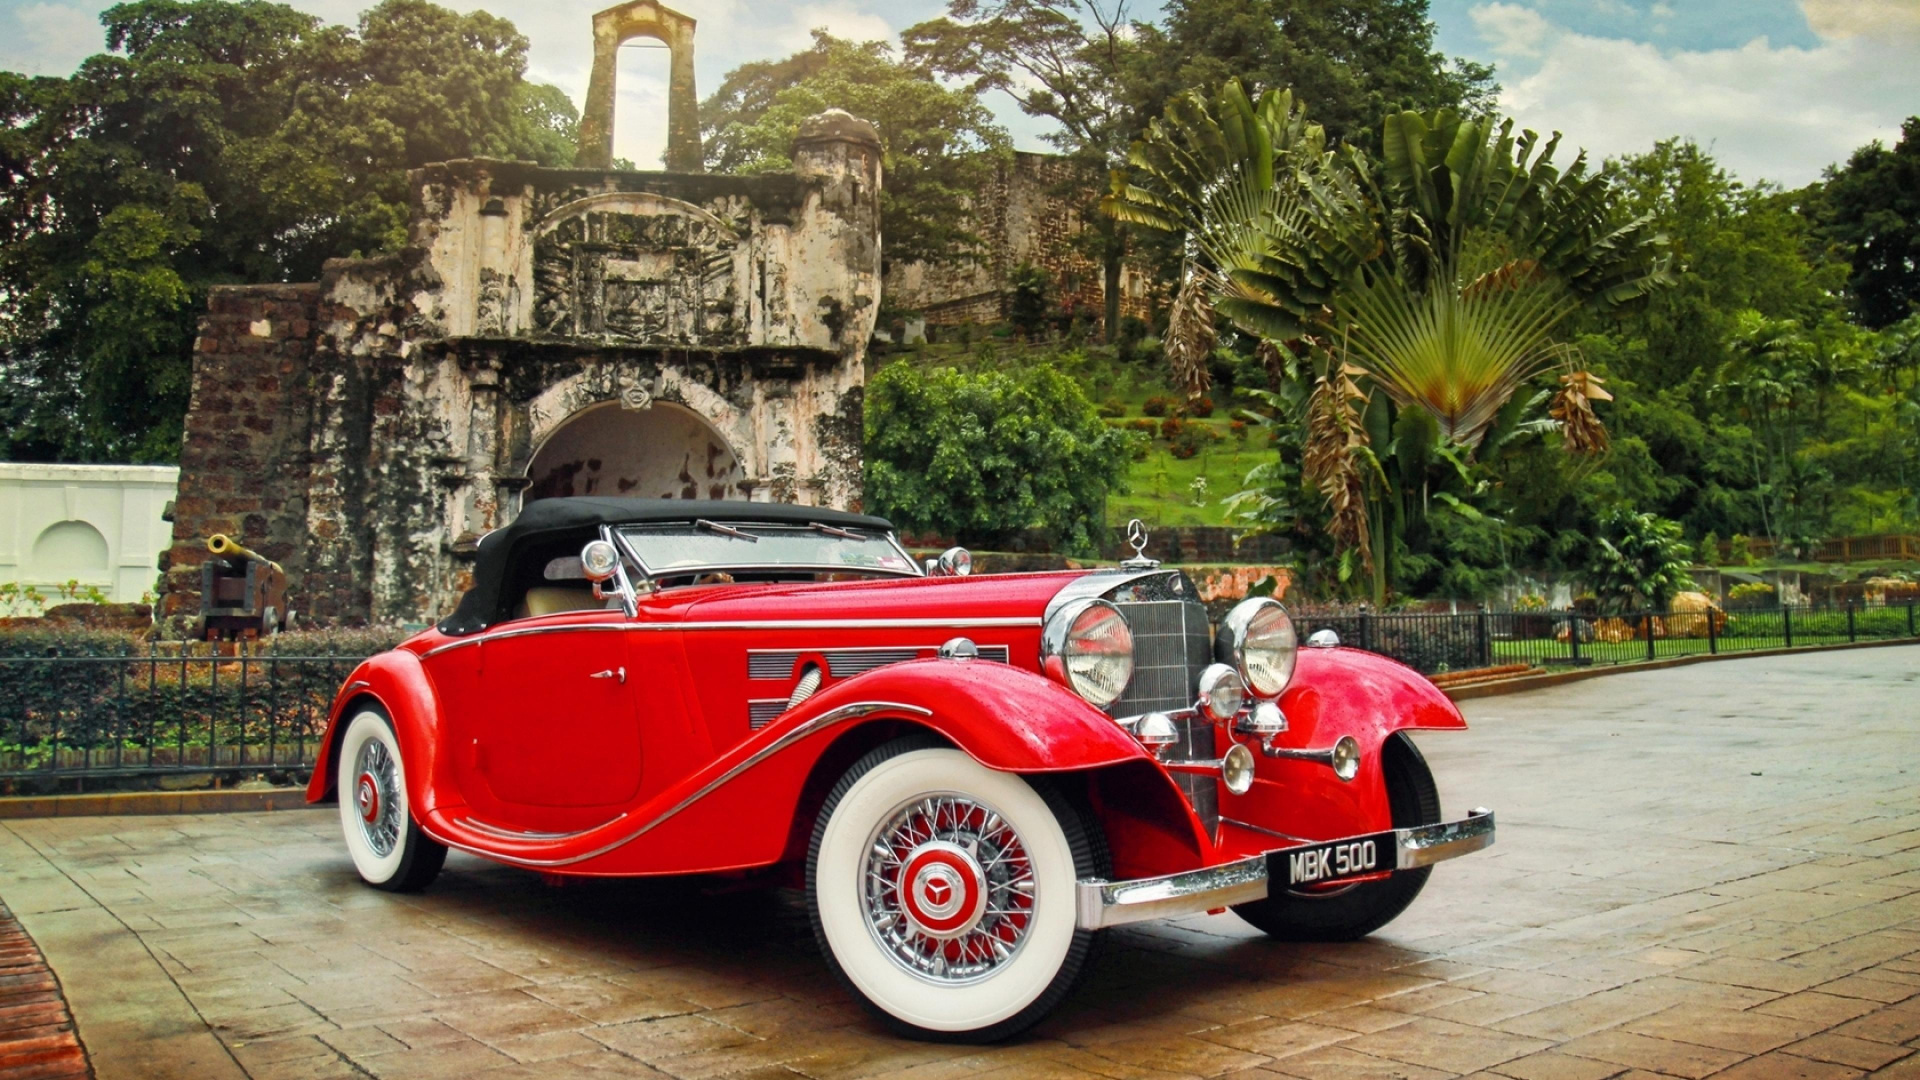 Red and White Vintage Car. Wallpaper in 1920x1080 Resolution